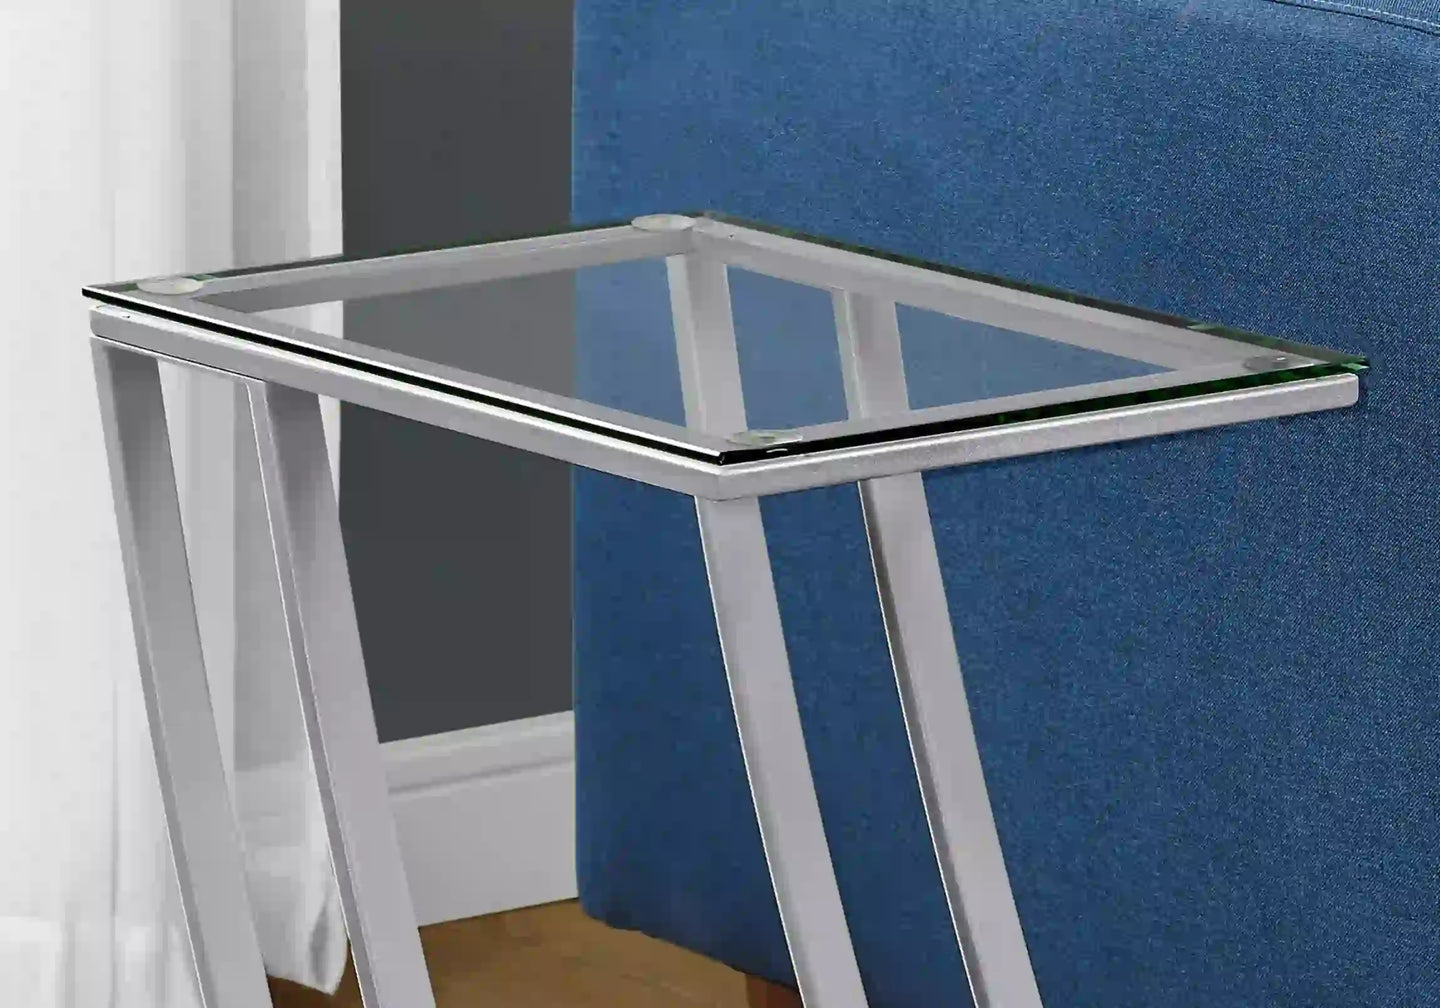 Silver /clear Accent Table / Side Table - I 3090